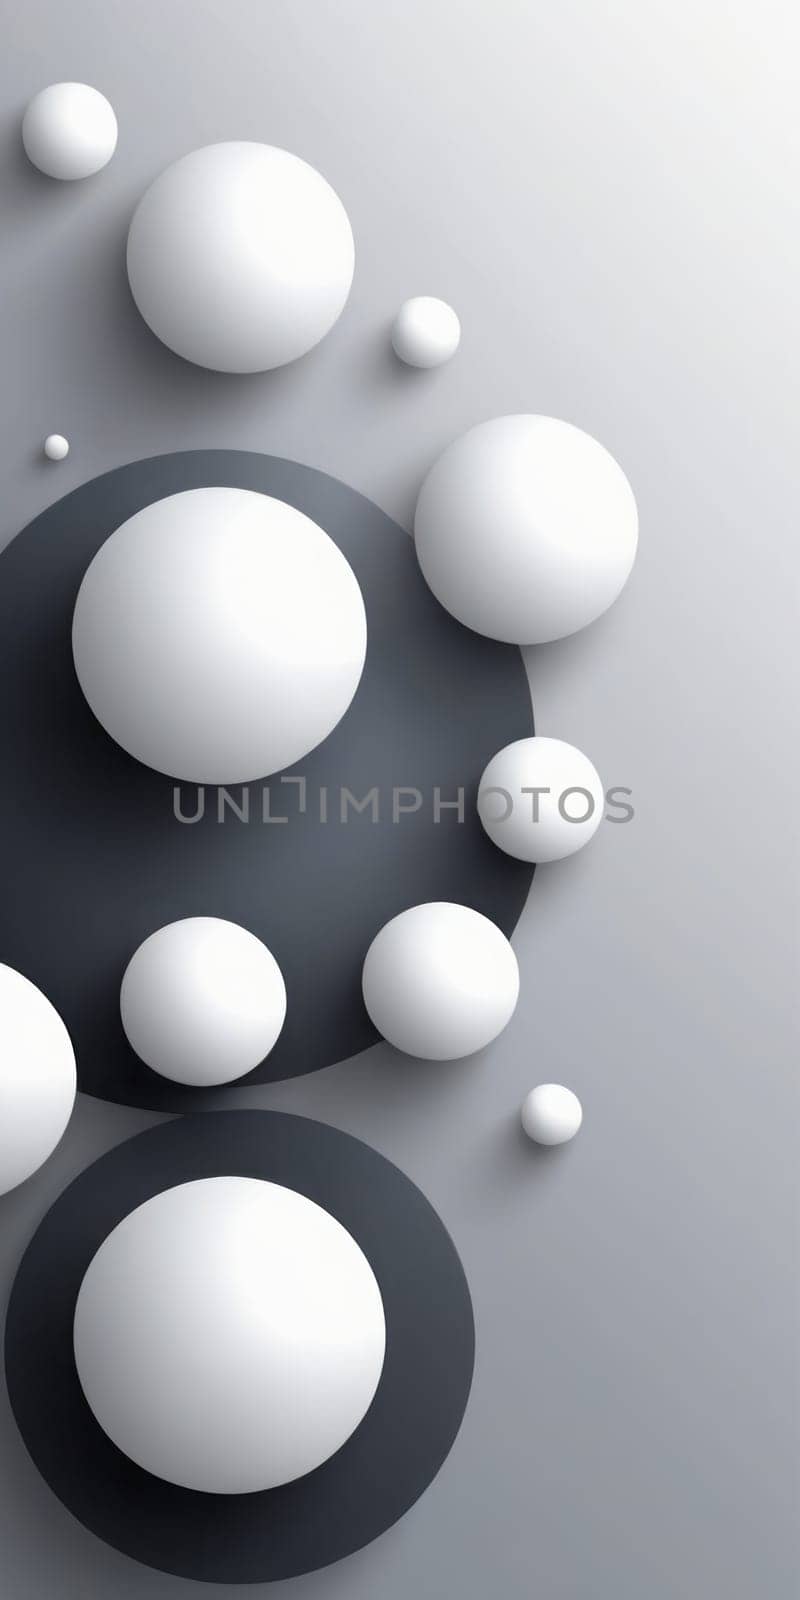 Spherical Shapes in White and Grey by nkotlyar